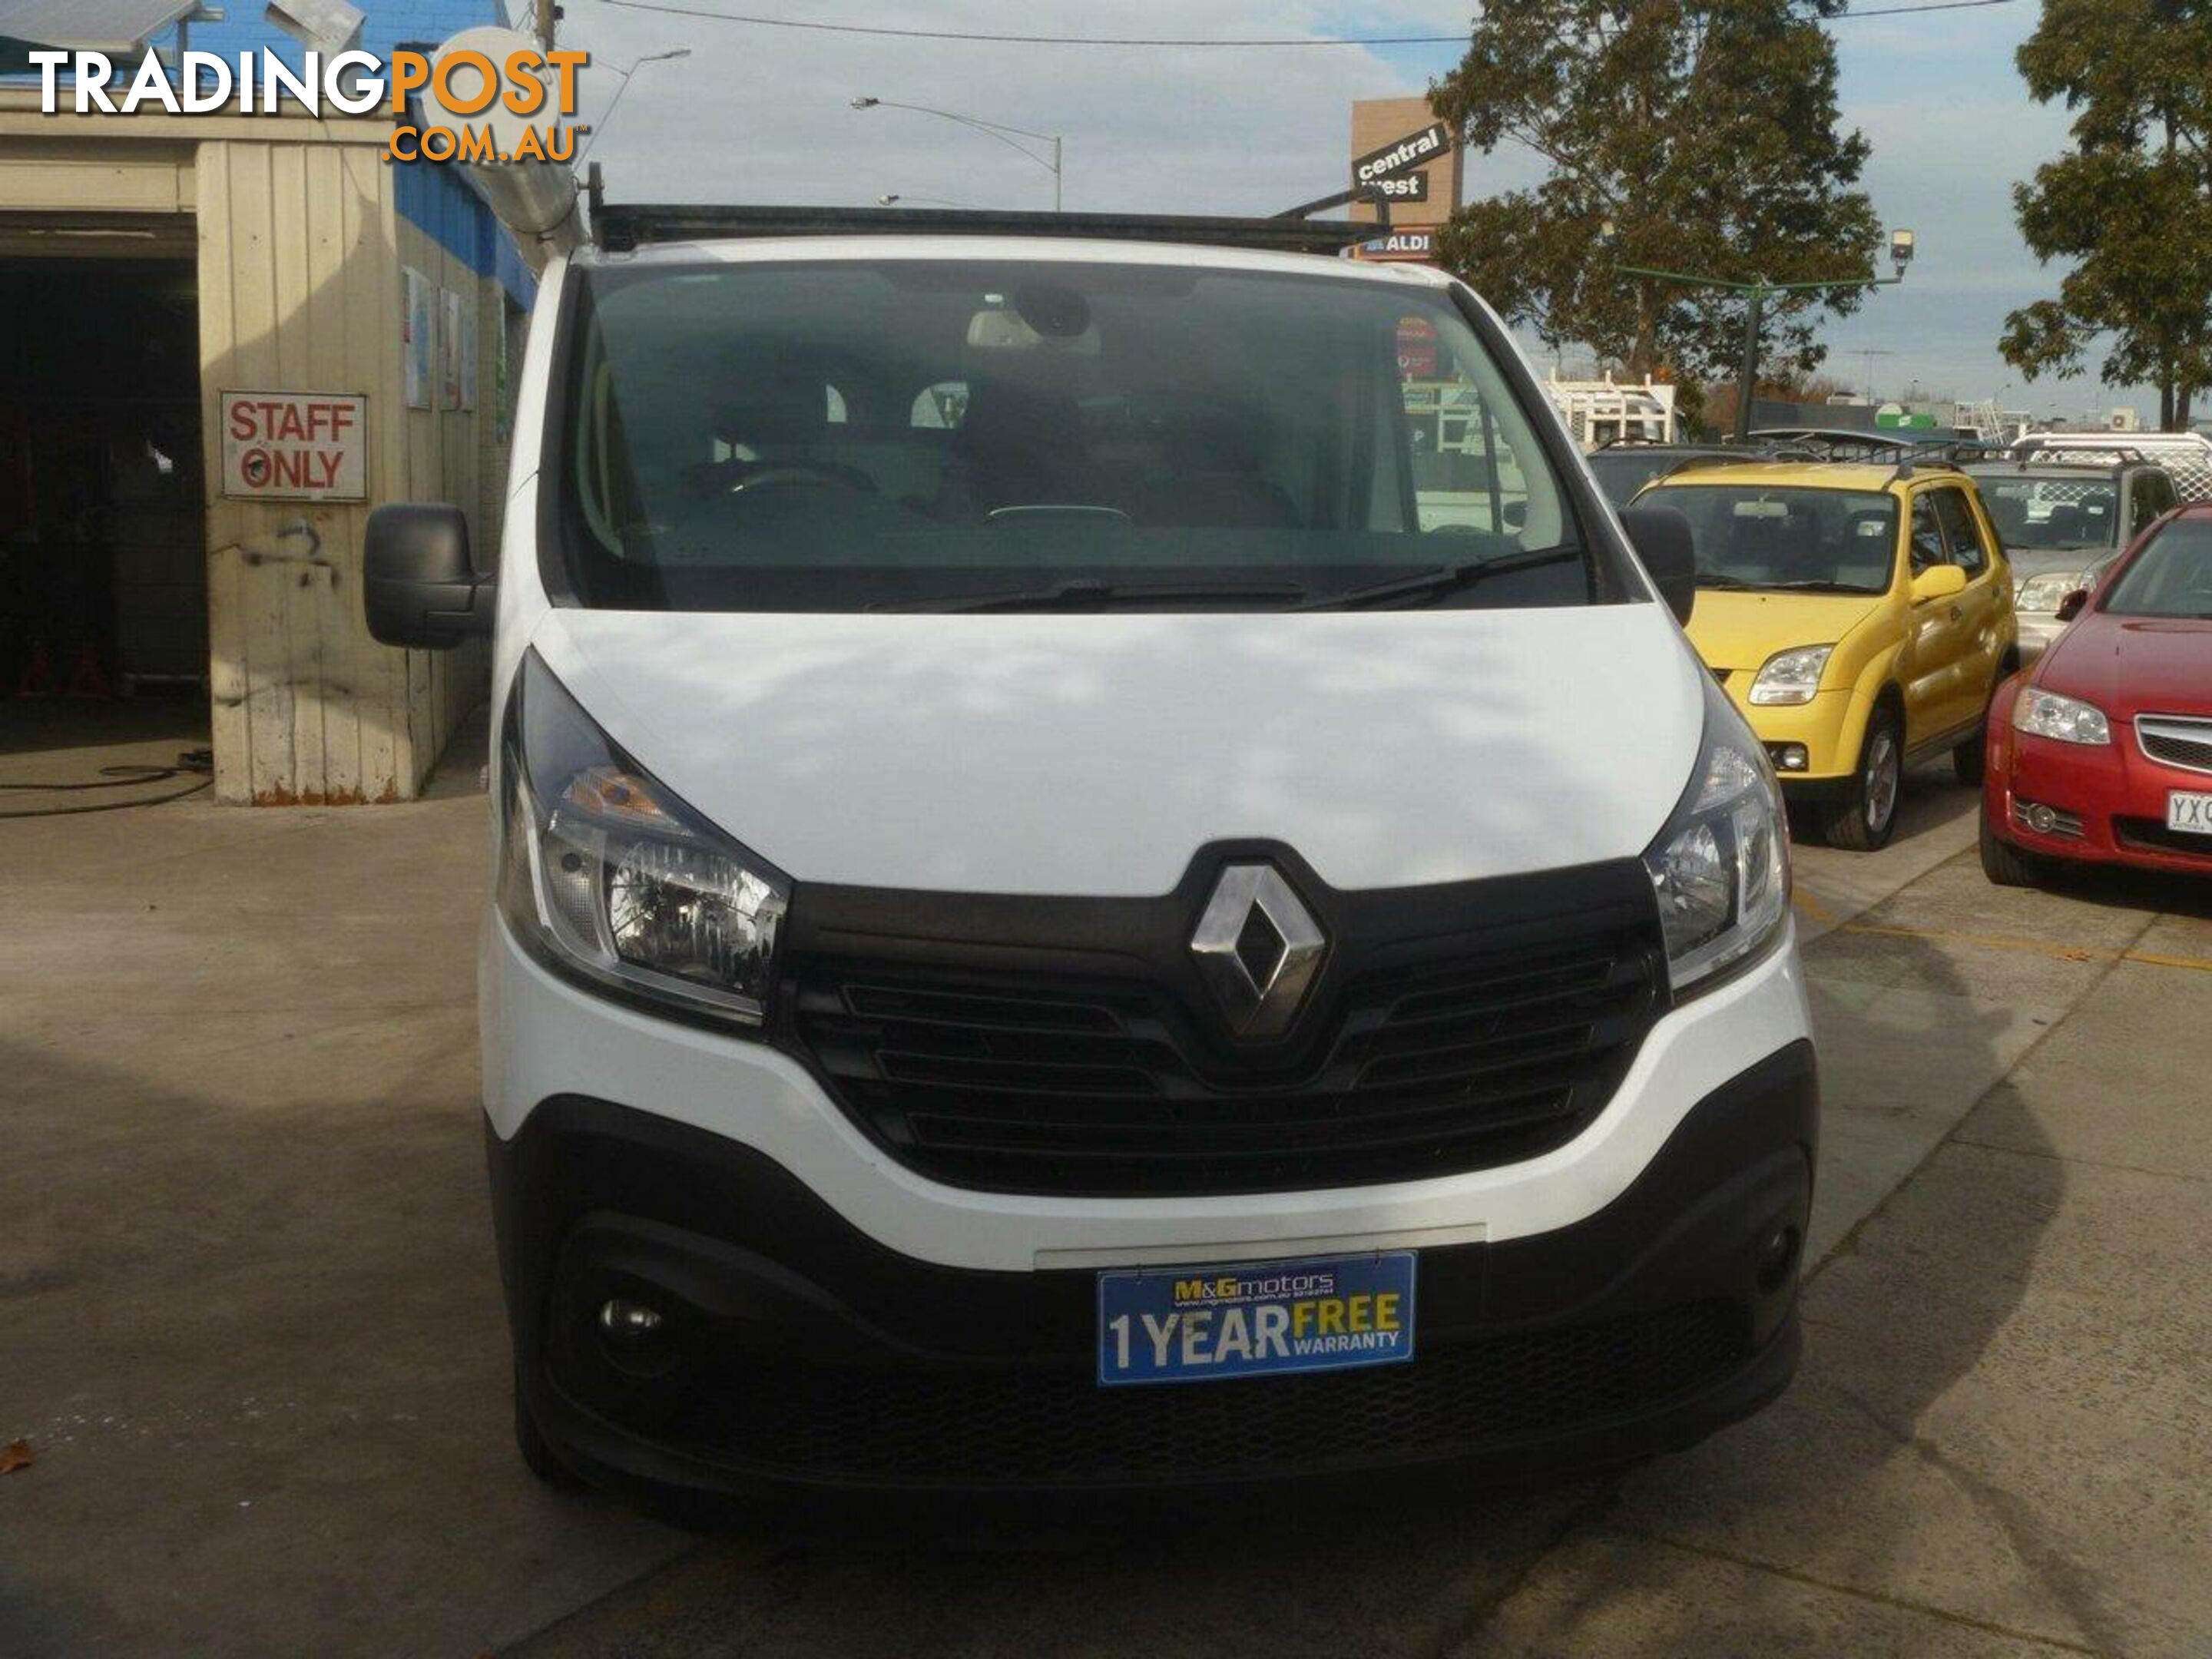 2015 RENAULT TRAFIC SWB X82 COMMERCIAL